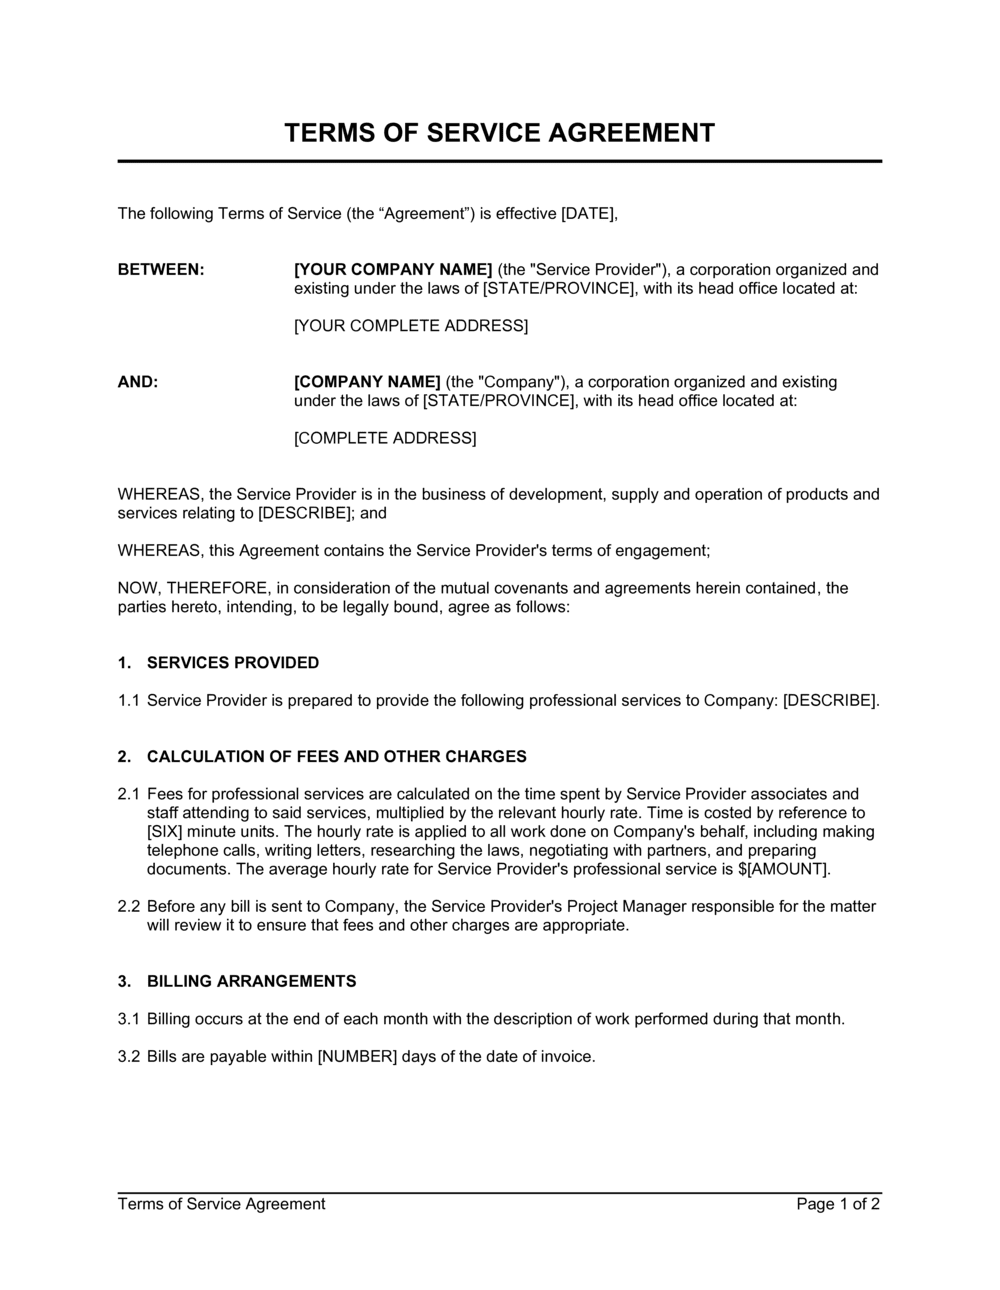 Terms of Service Agreement Template  by Business-in-a-Box™ With Regard To heads of terms agreement template